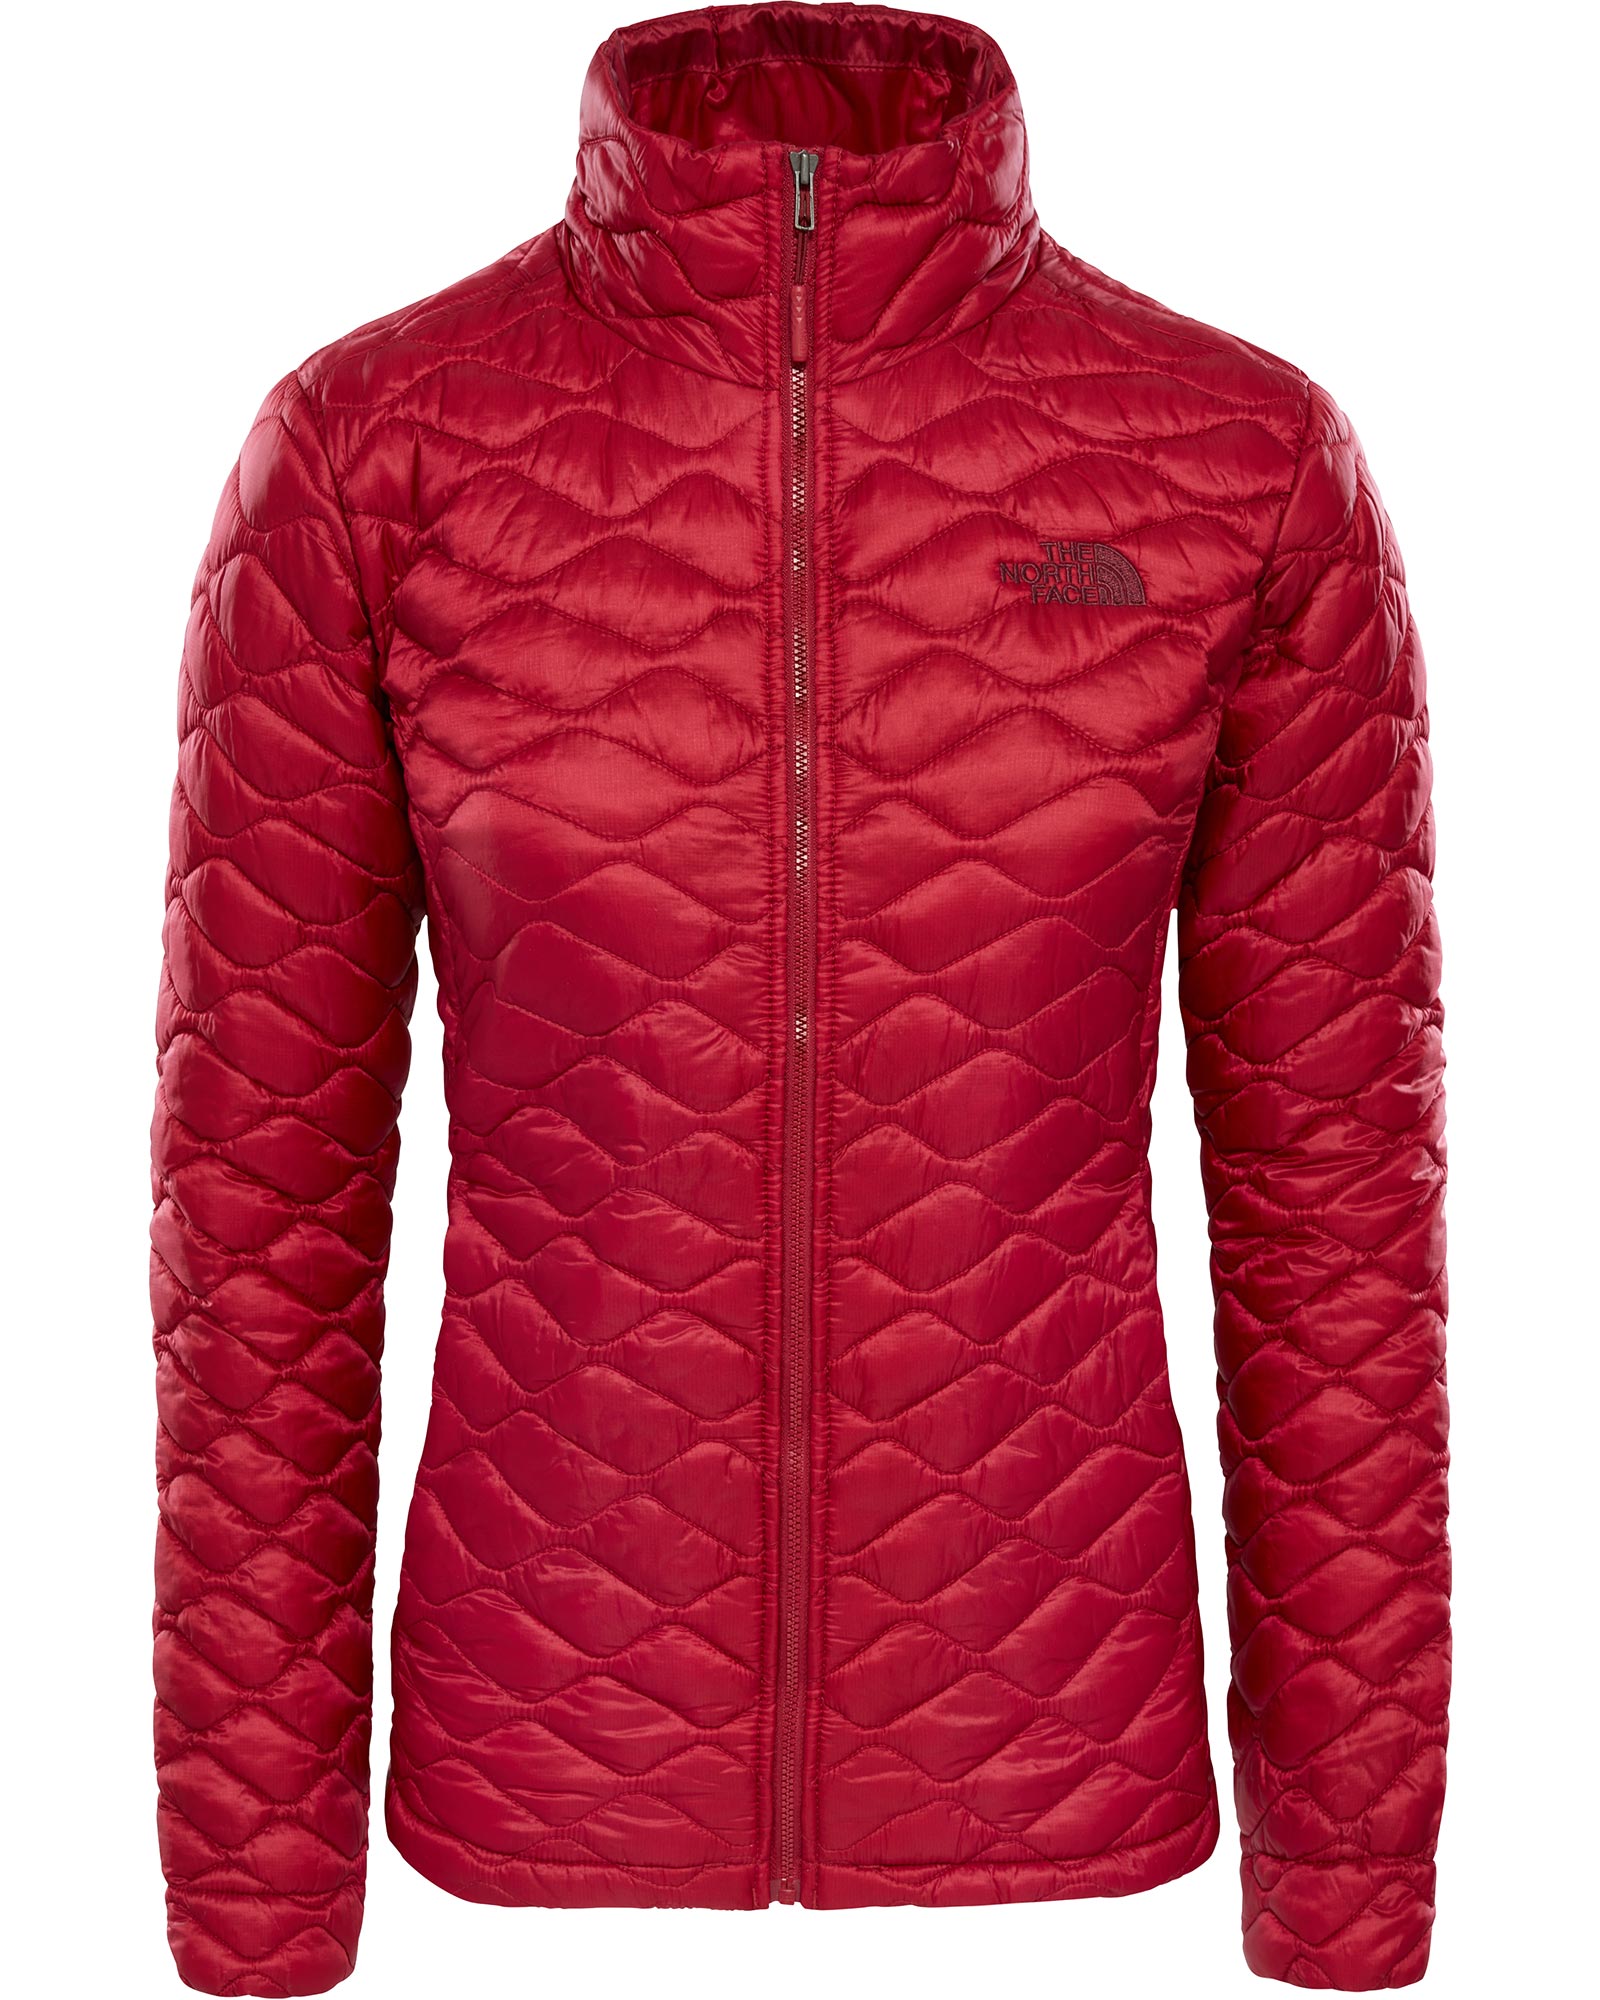 The North Face ThermoBall Women’s Jacket - Rumba Red XS